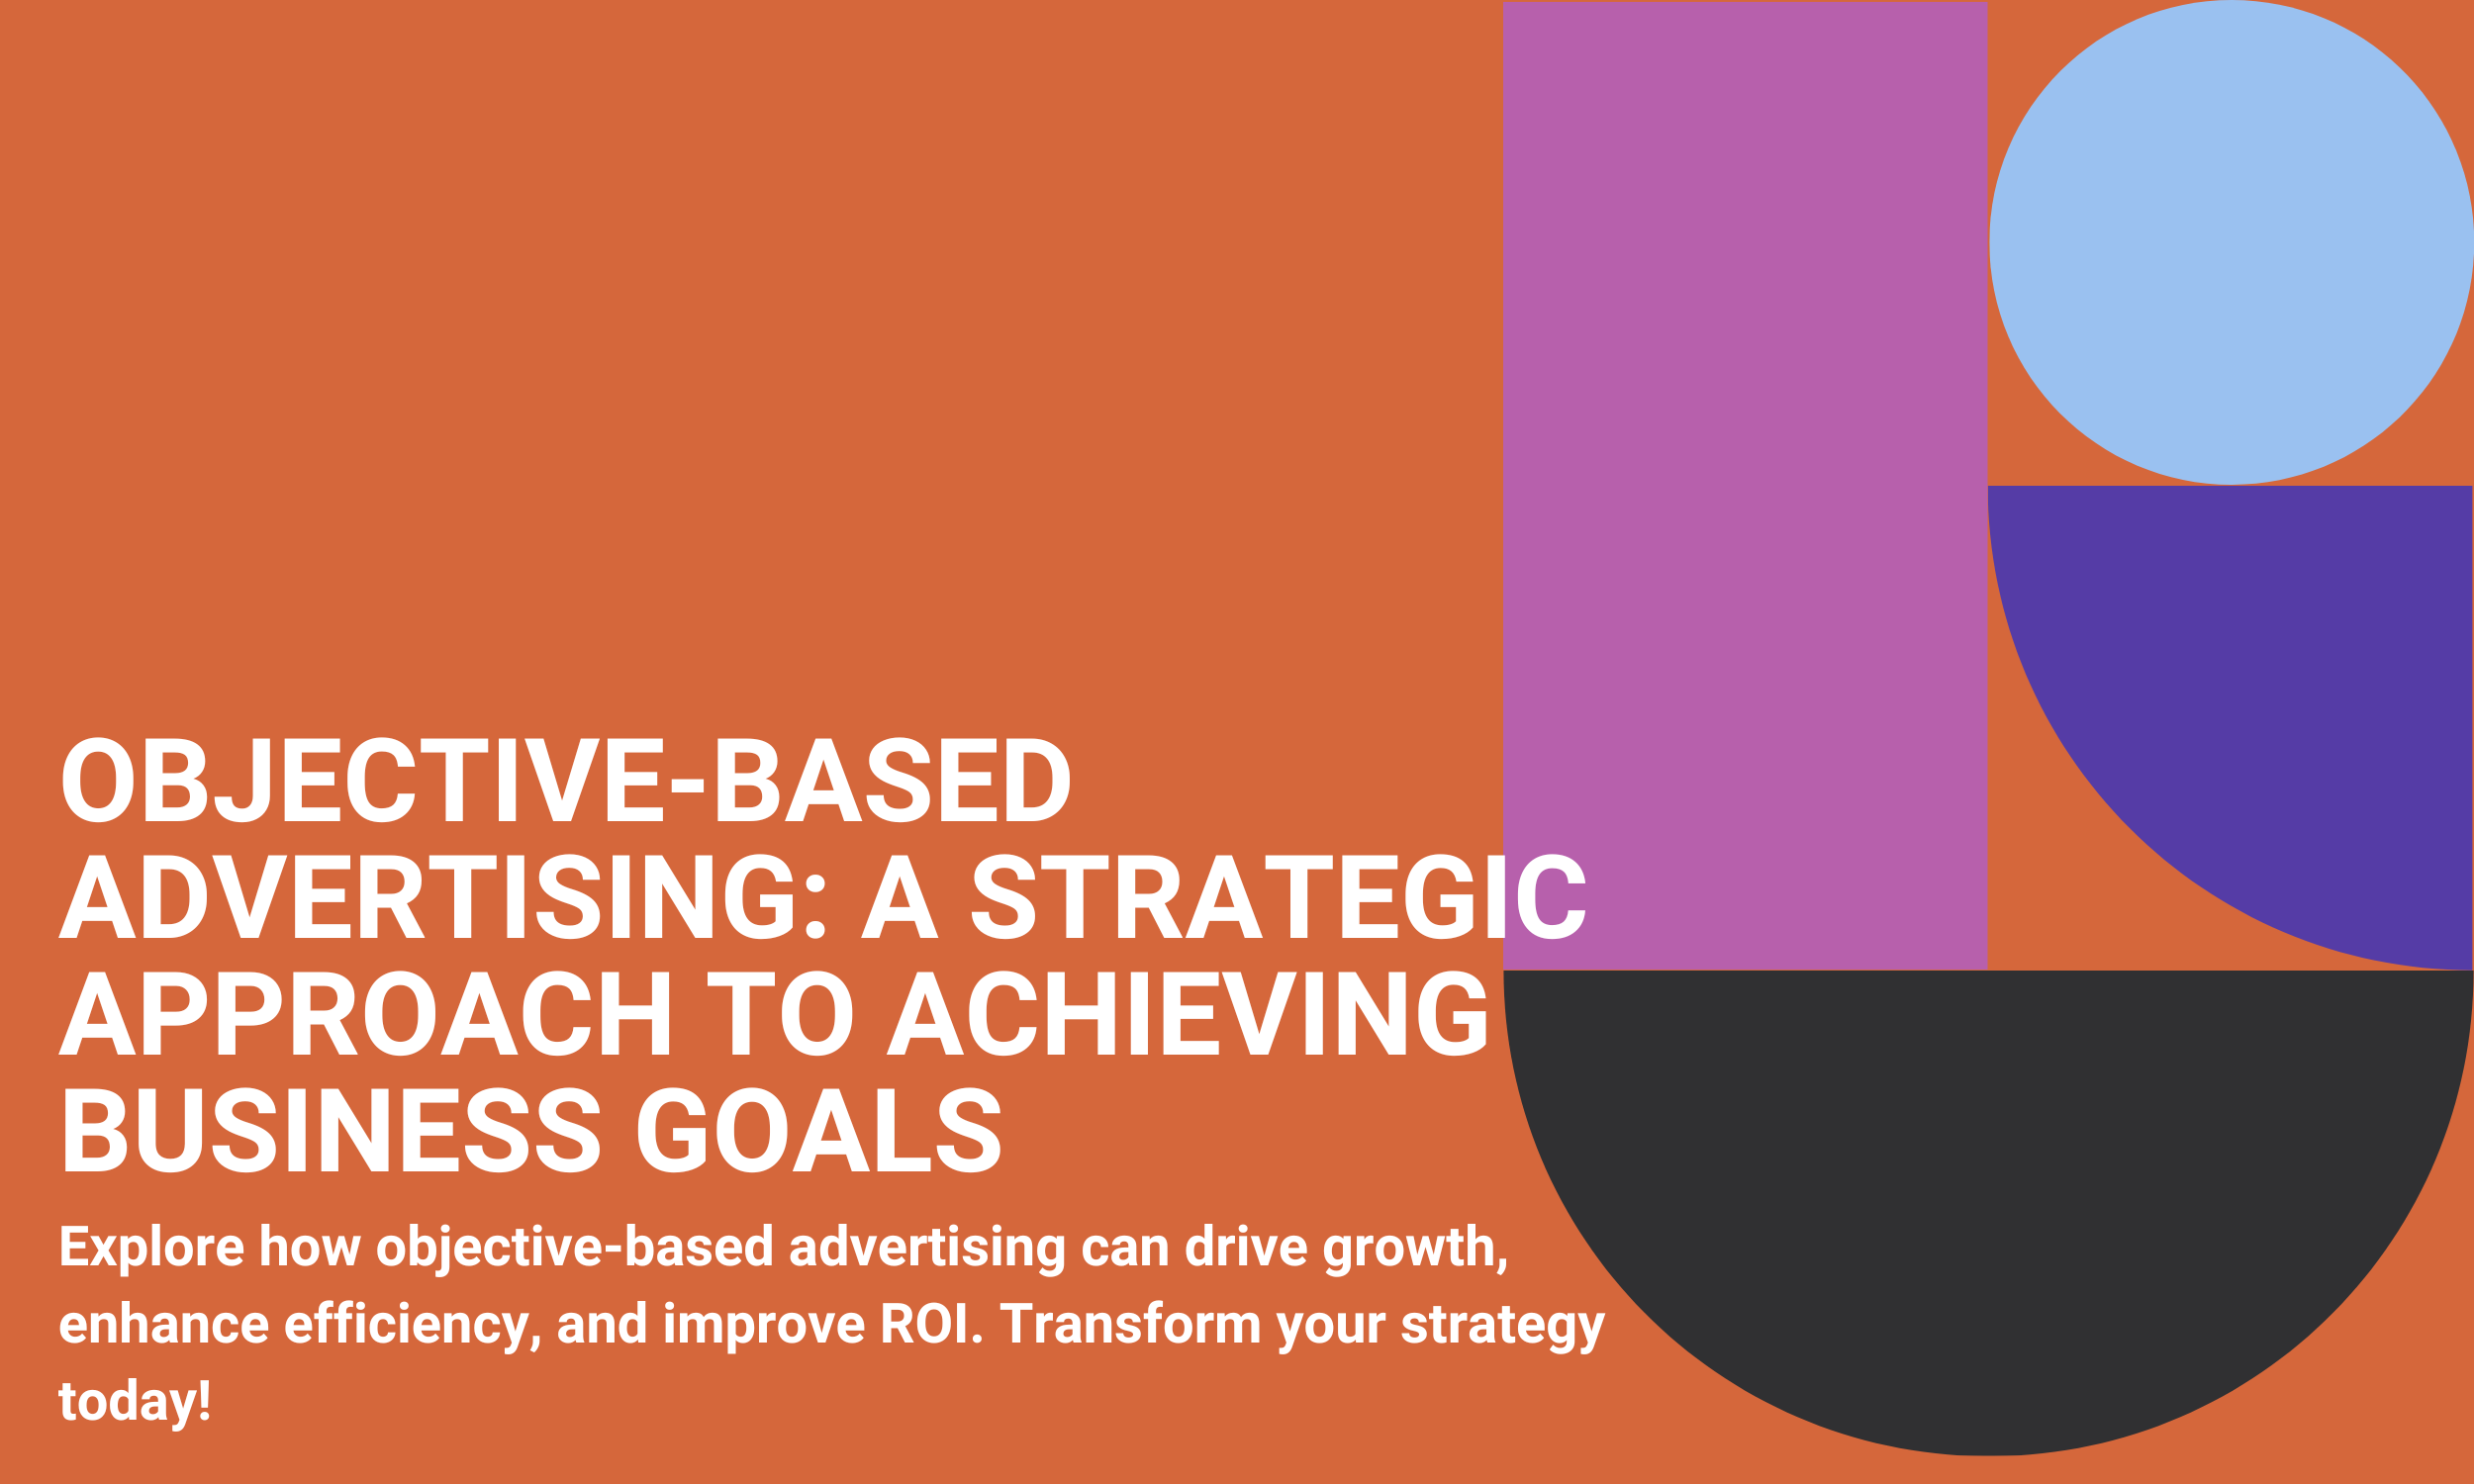 Objective-Based Advertising: A Strategic Approach to Achieving Business Goals